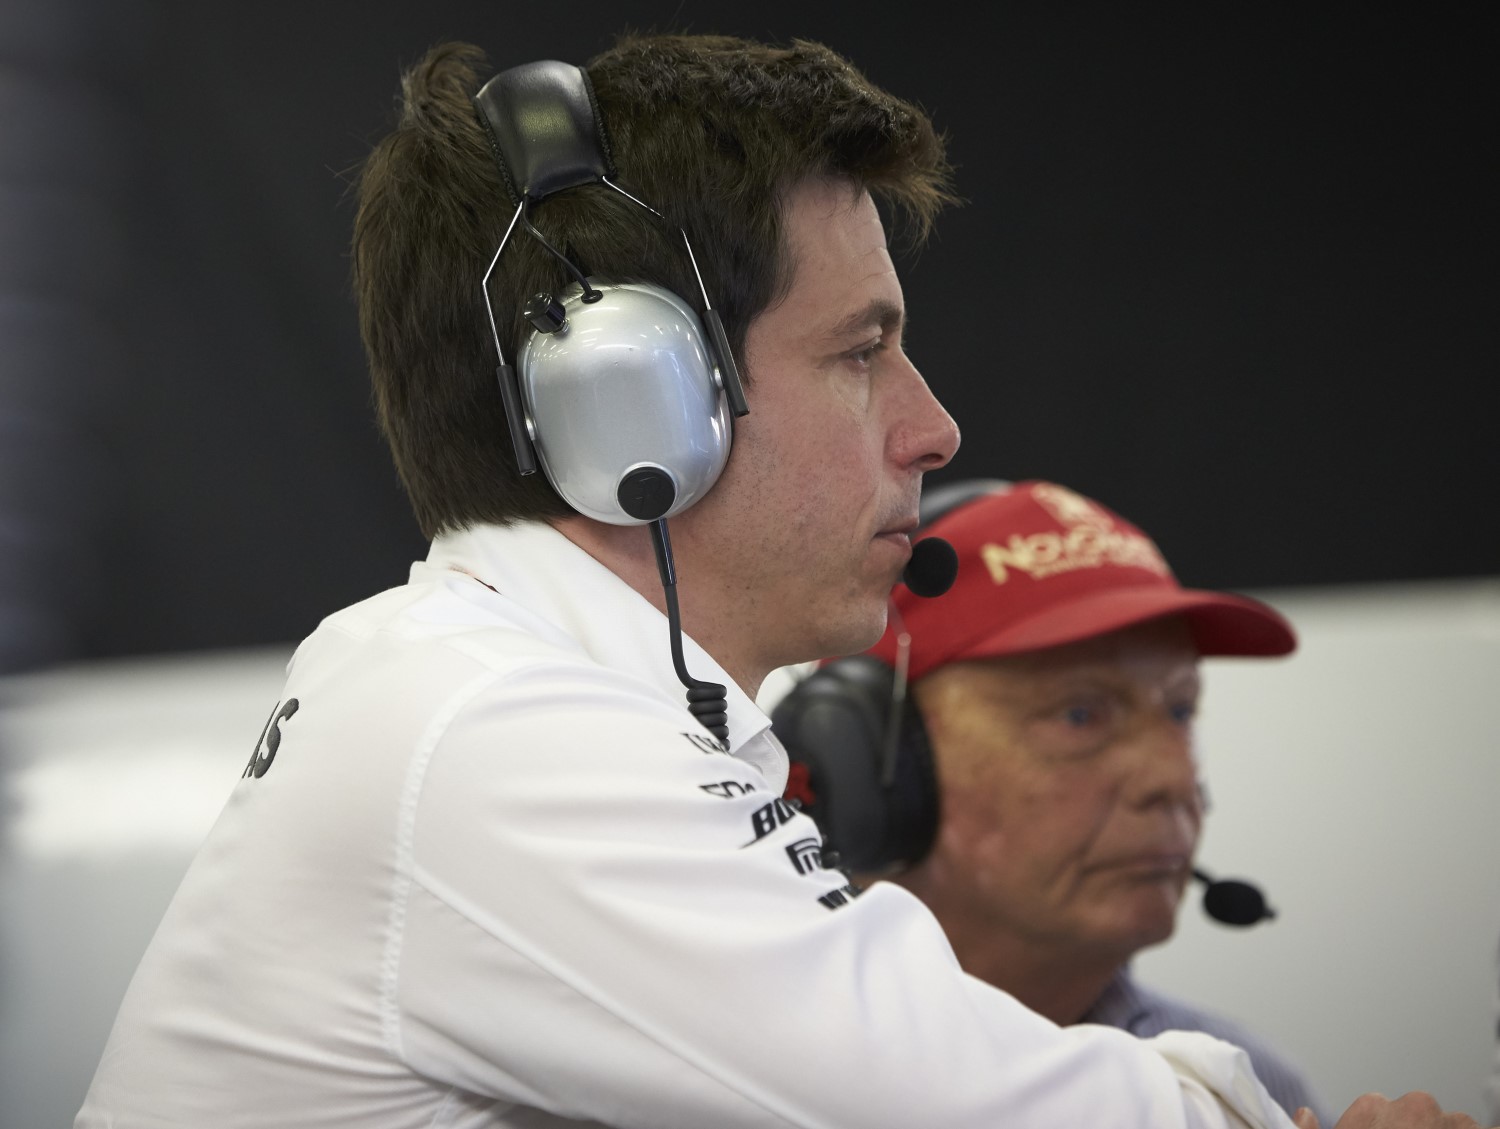 Wolff and Lauda see no need for Alonso